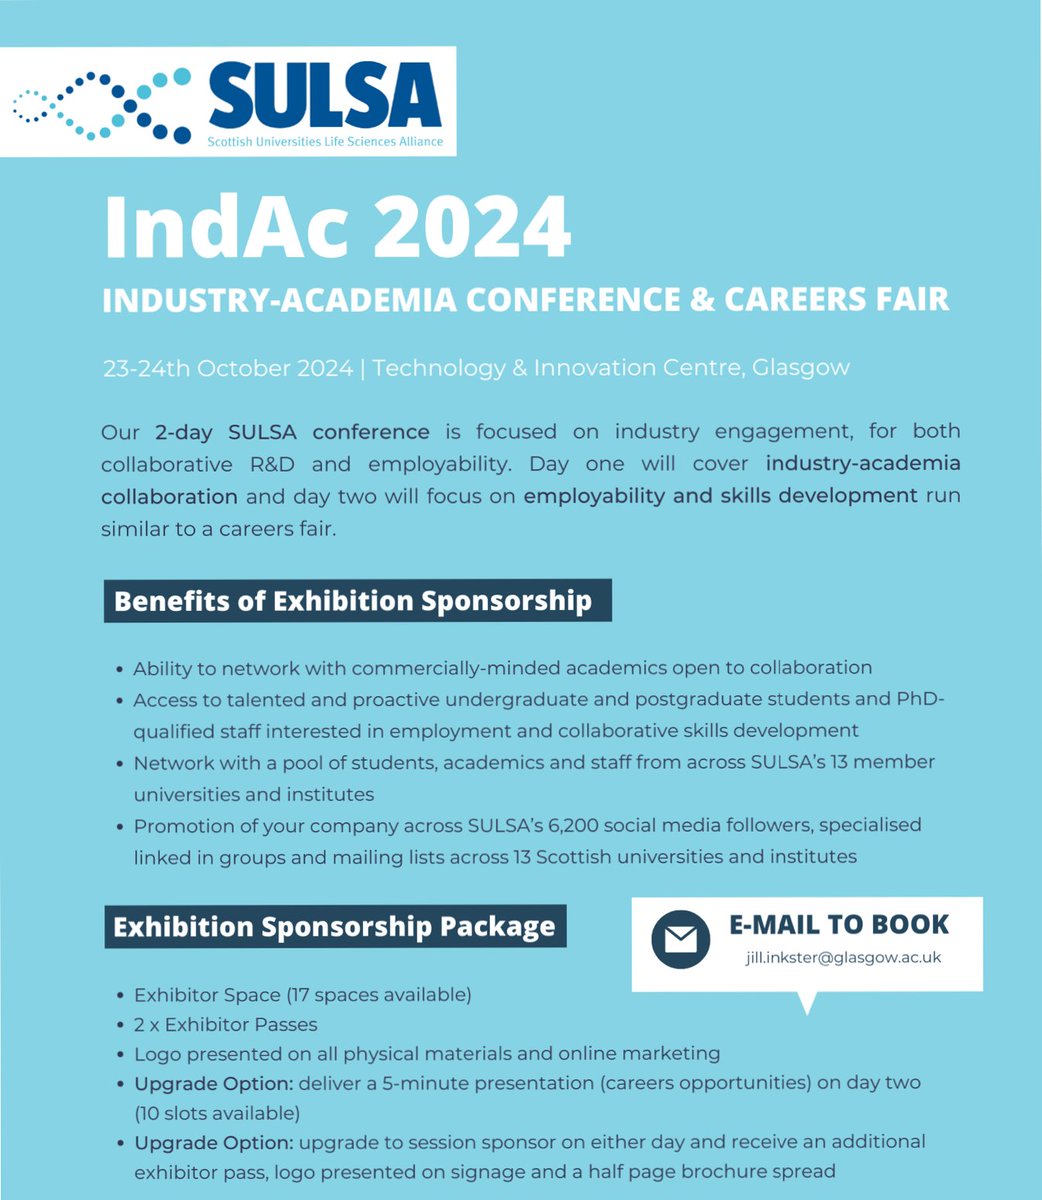 IndAc24 - EXHIBITOR REGISTRATION NOW OPEN 🥳We're excited to be back for IndAc24 after a successful IndAc23 which welcomed over 230 attendees over two days. Fancy securing an exhibitors spots for your organisation? E-mail jill.inkster@glasgow.ac.uk ASAP as spaces are limited! ☺️